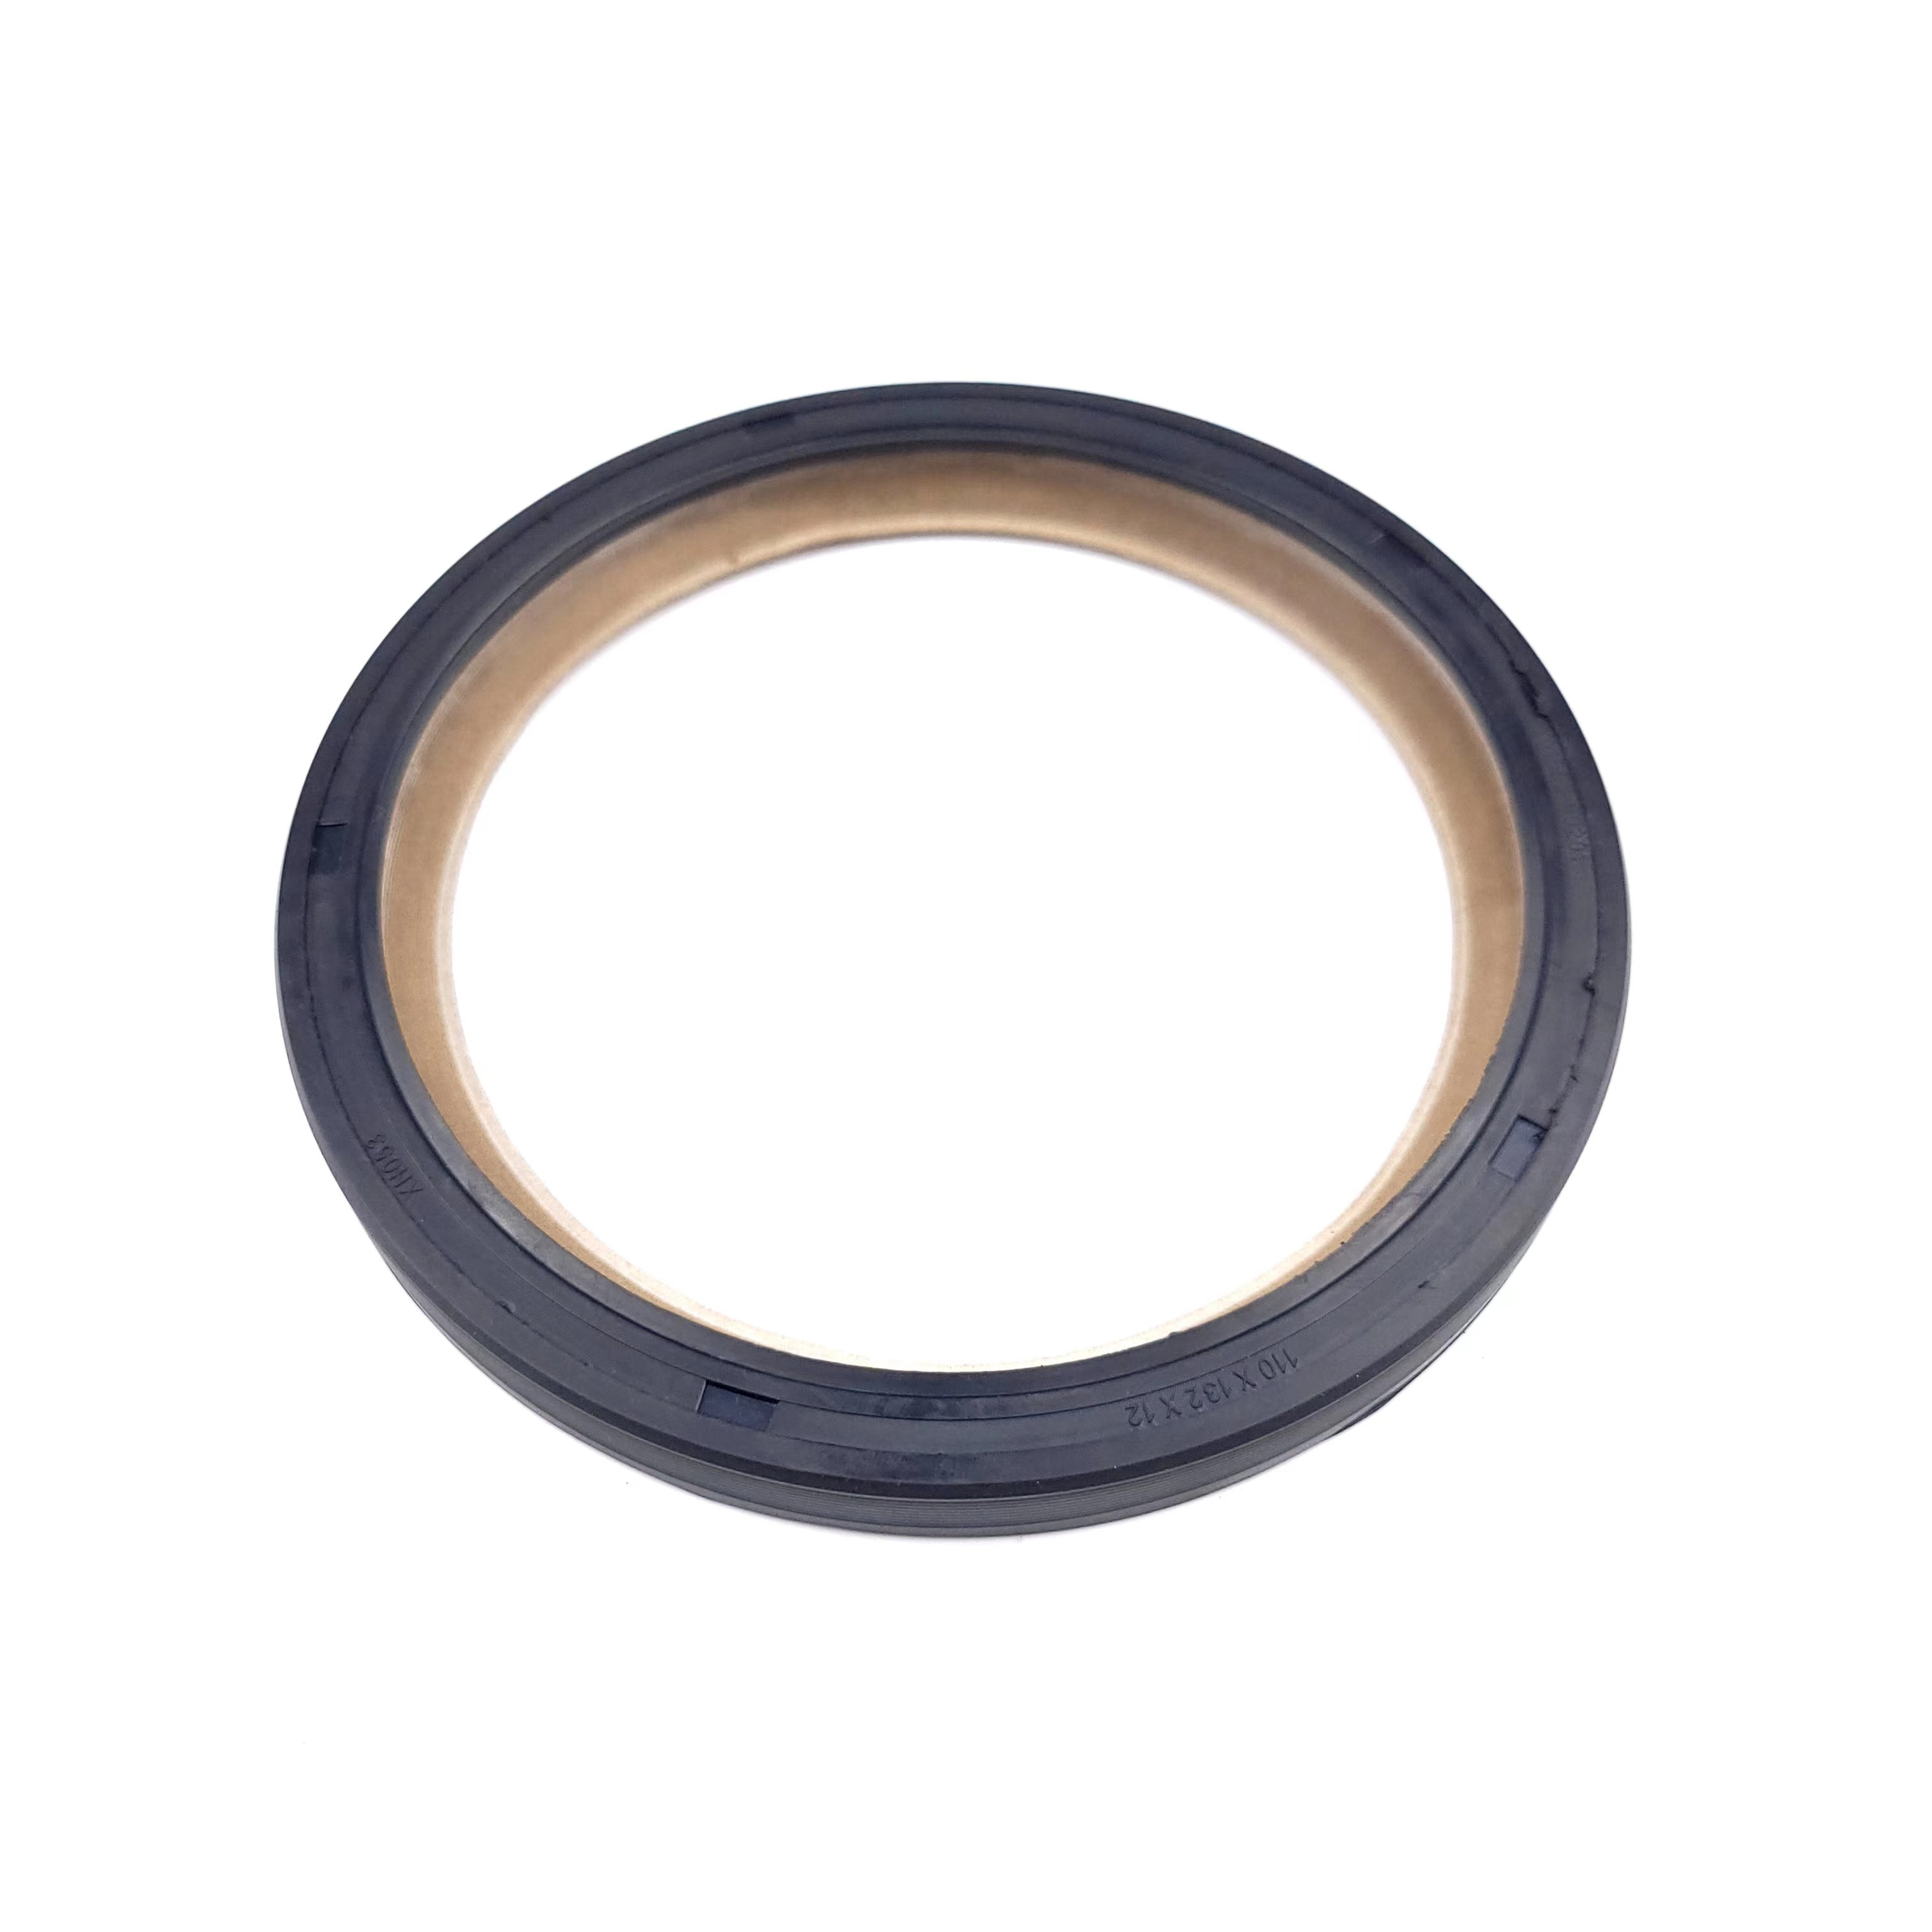 Shaft hub oil seal automobile gearbox accessories OEM1701553-90200 size 110*132*12 Truck axle oil seal